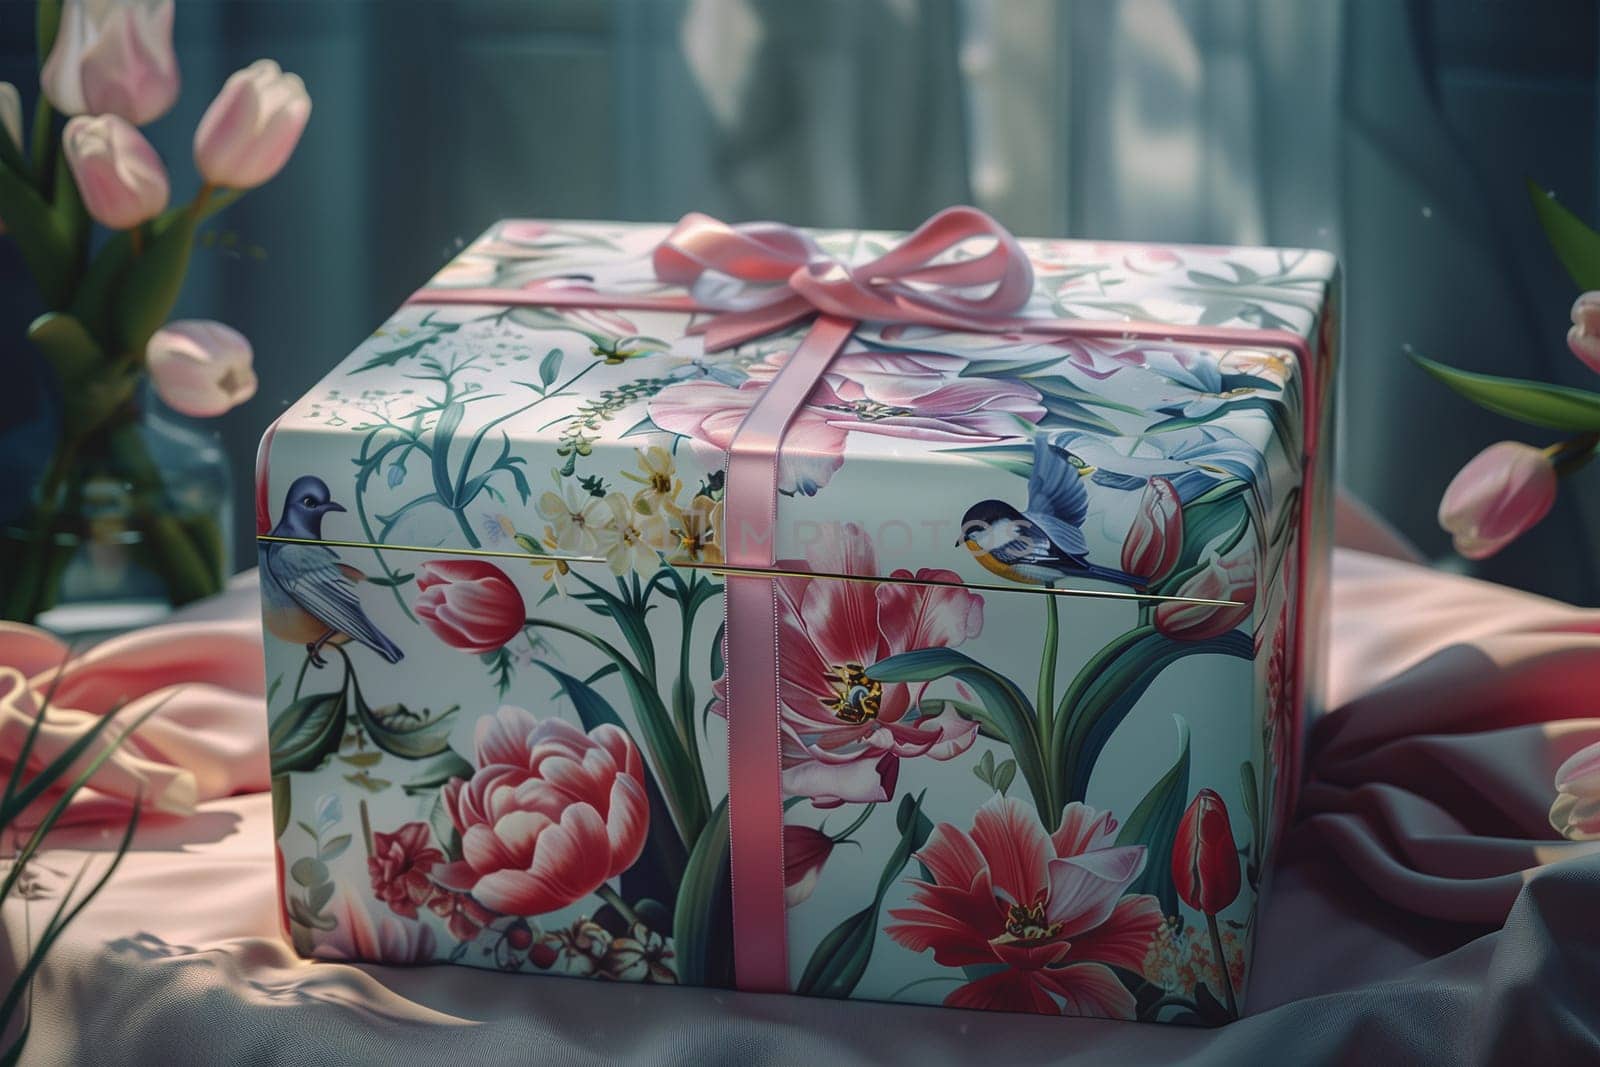 A pink gift box with a ribbon placed neatly on a bed, creating a charming and thoughtful scene.